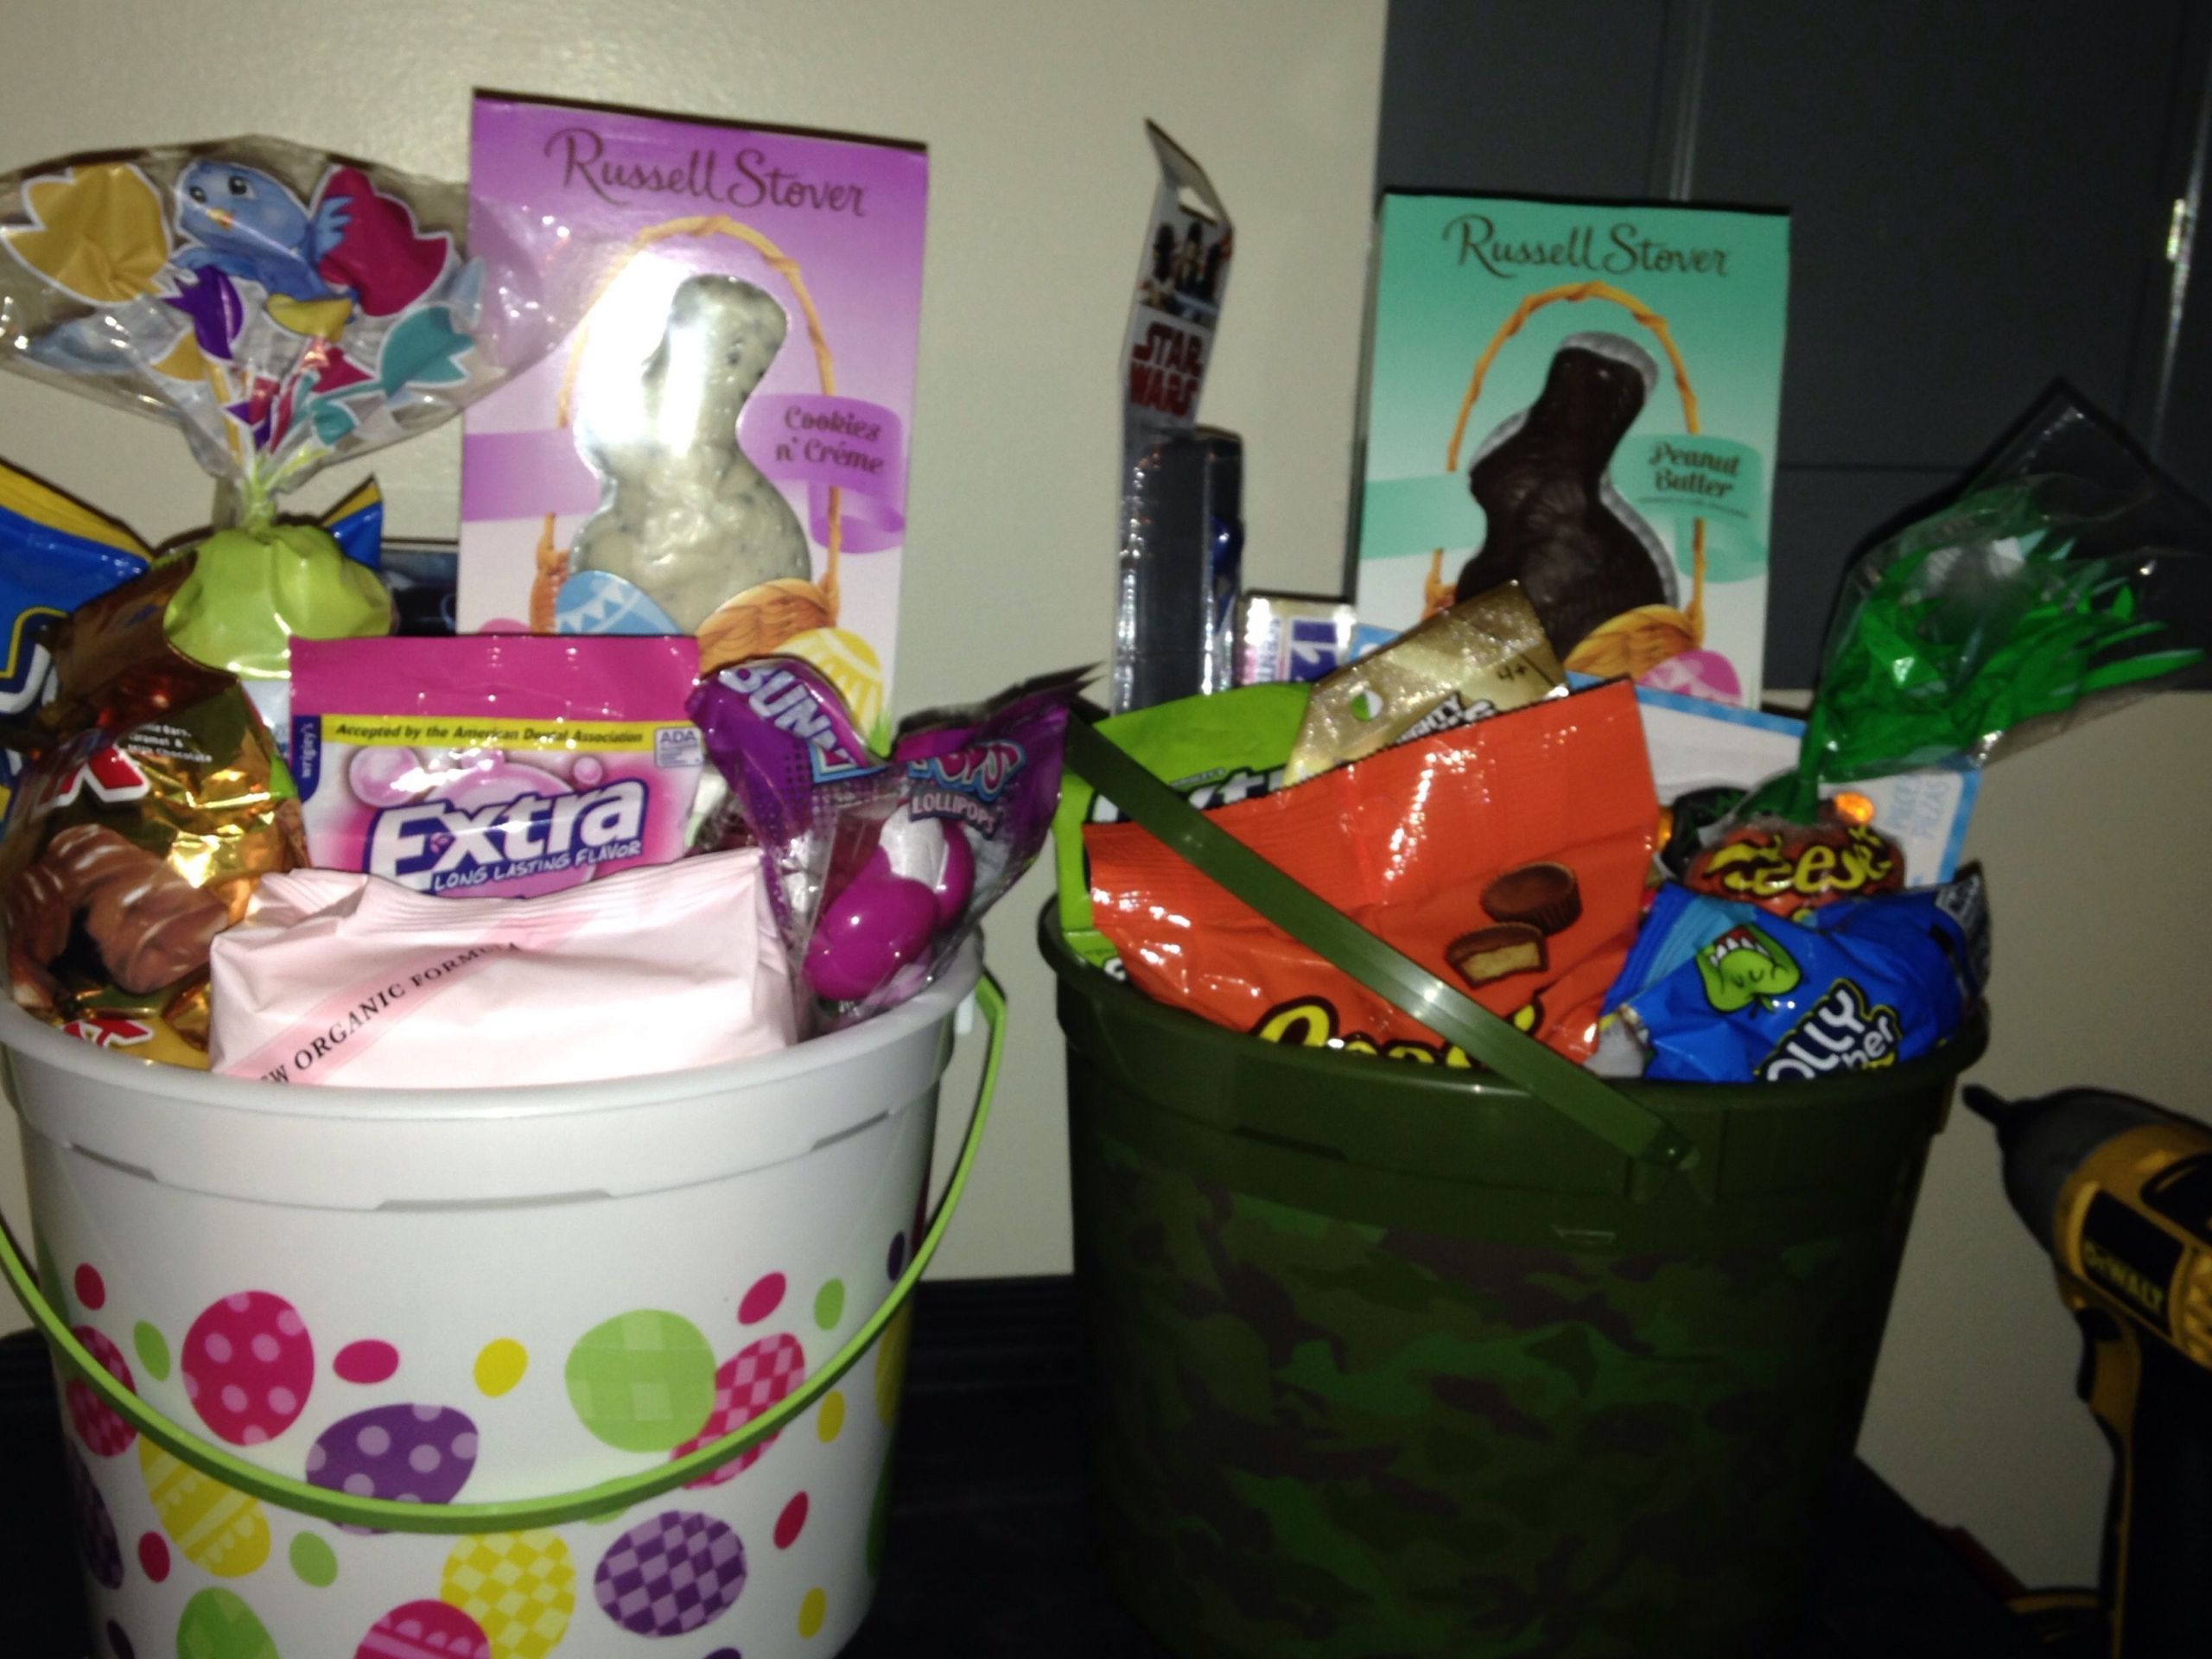 Easter Basket Ideas For 9 Year Old Boy
 Easter basket ideas for 12 year old girl and 9 year old